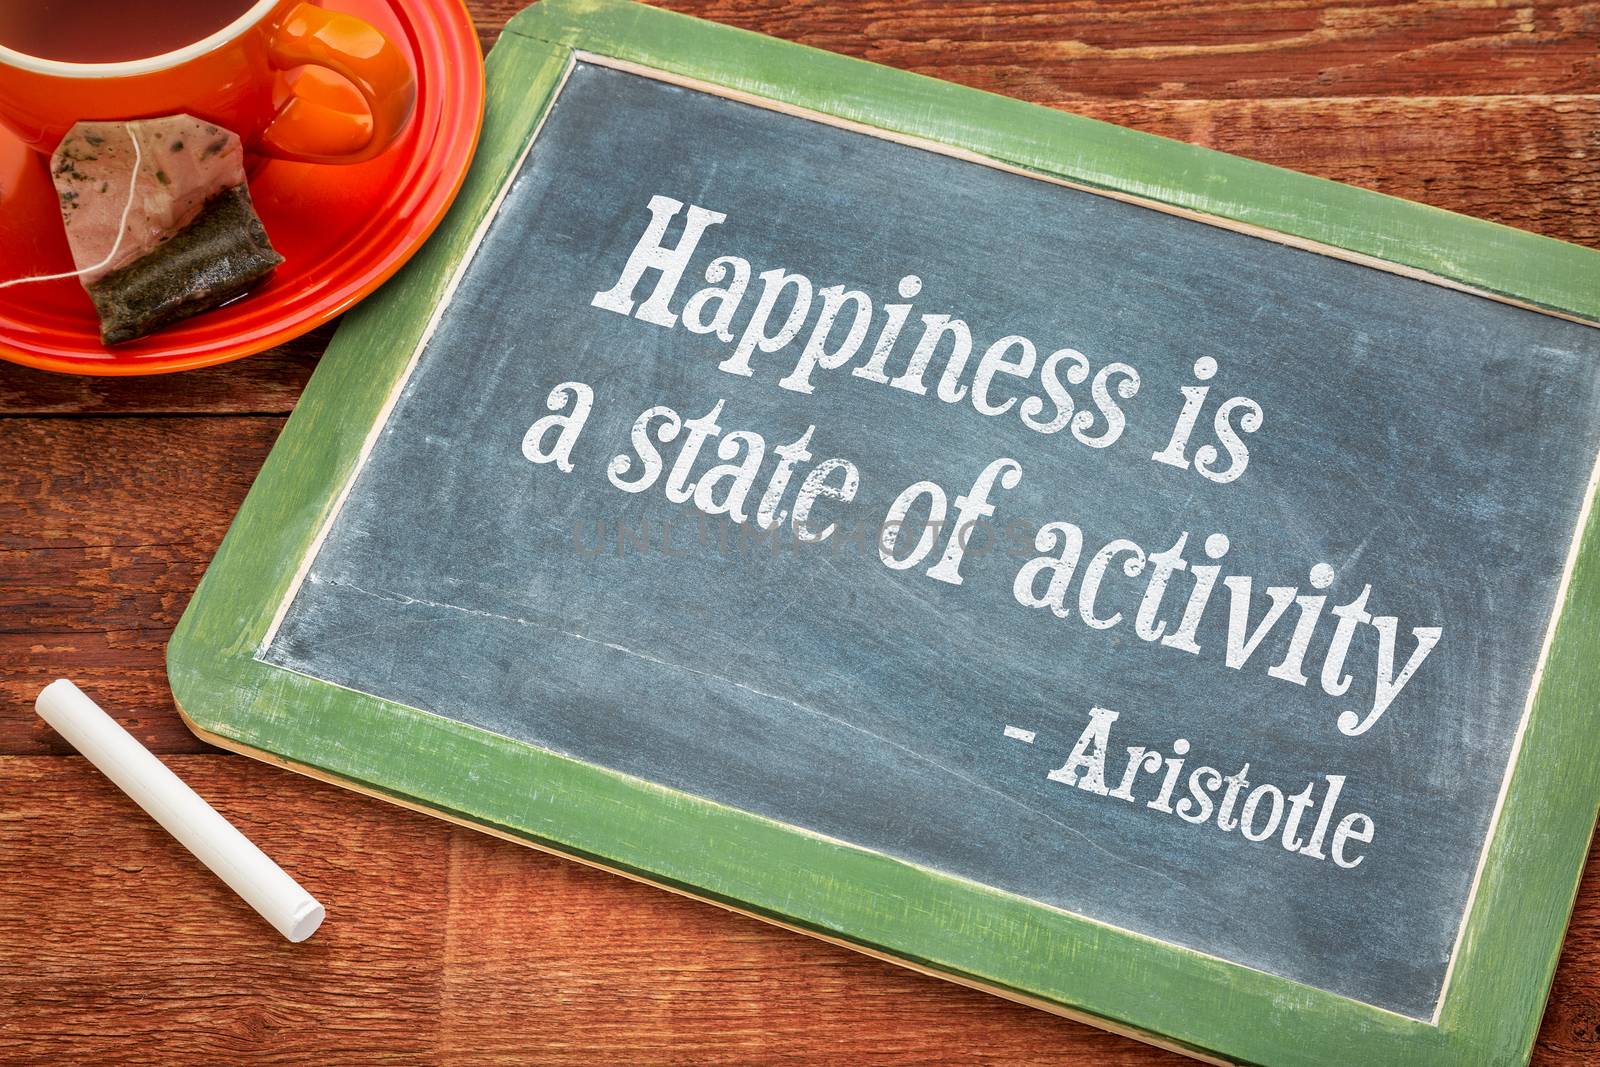 Happiness is a state of activity, a quote from Aristotle - motivational words on a slate blackboard with chalk and cup of tea